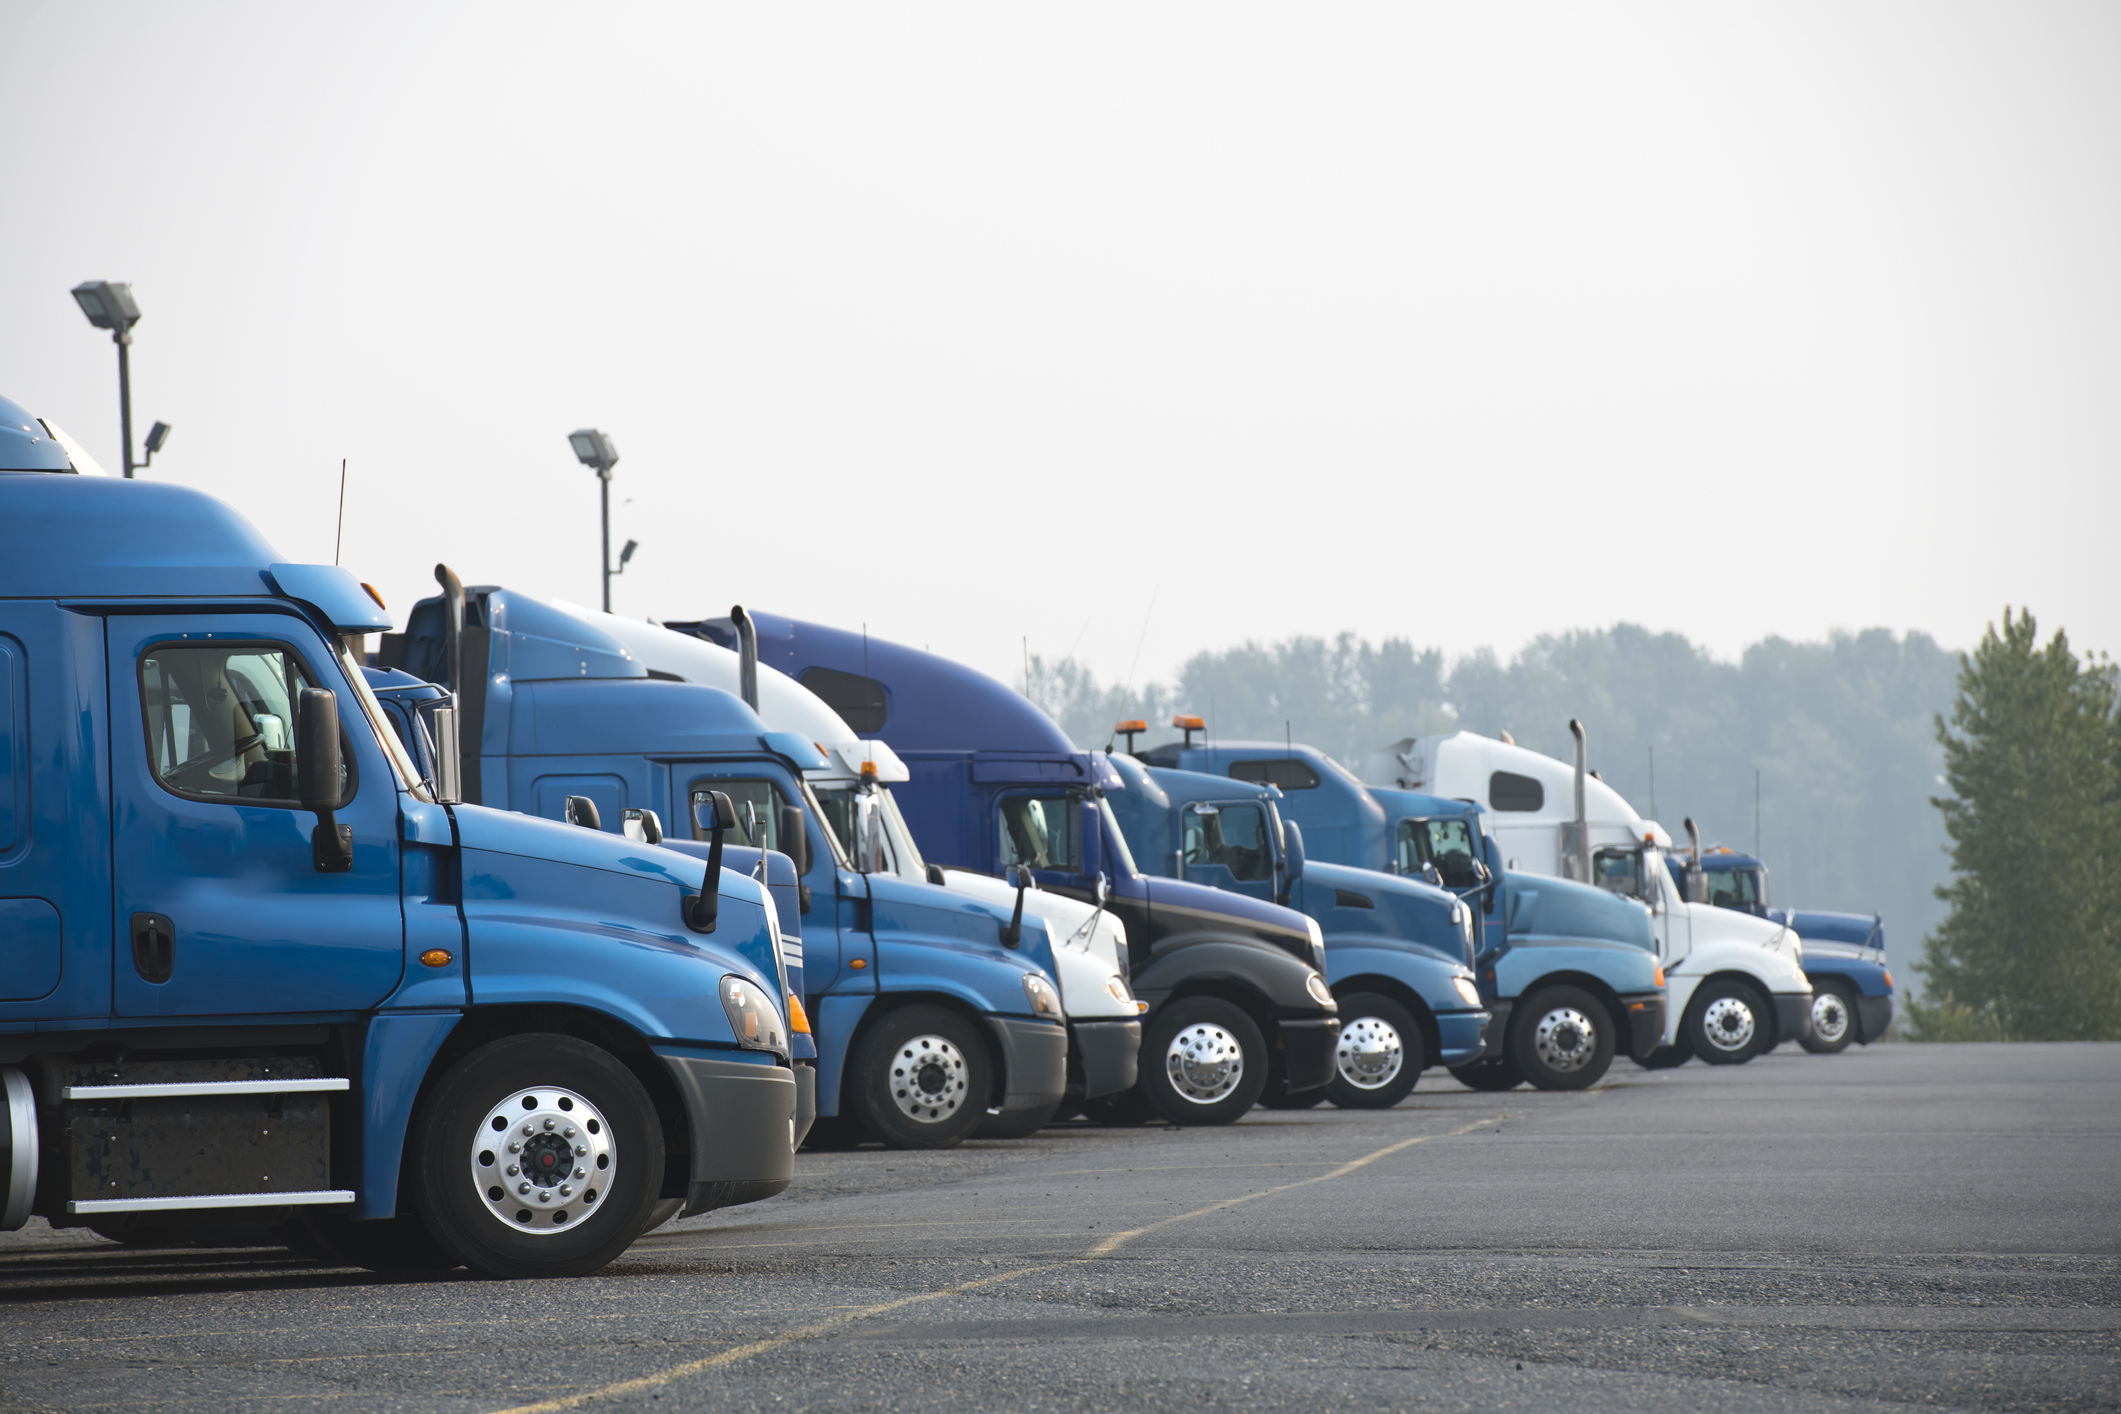 Hours-of-Service Regulations—Everything a Trucker Should Know